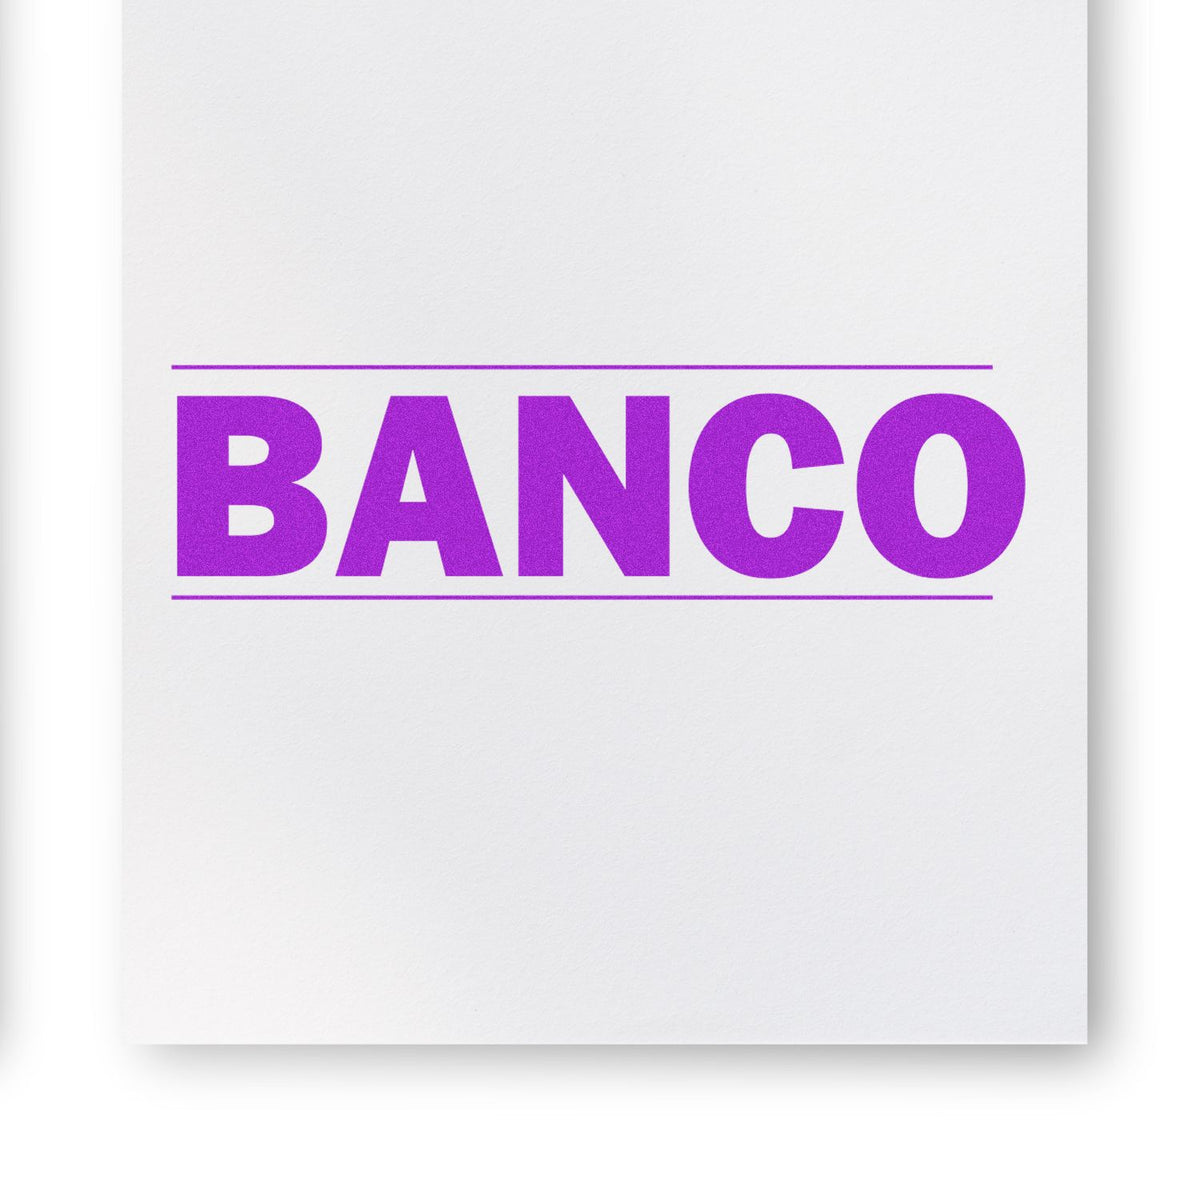 Large Bold Banco Rubber Stamp In Use